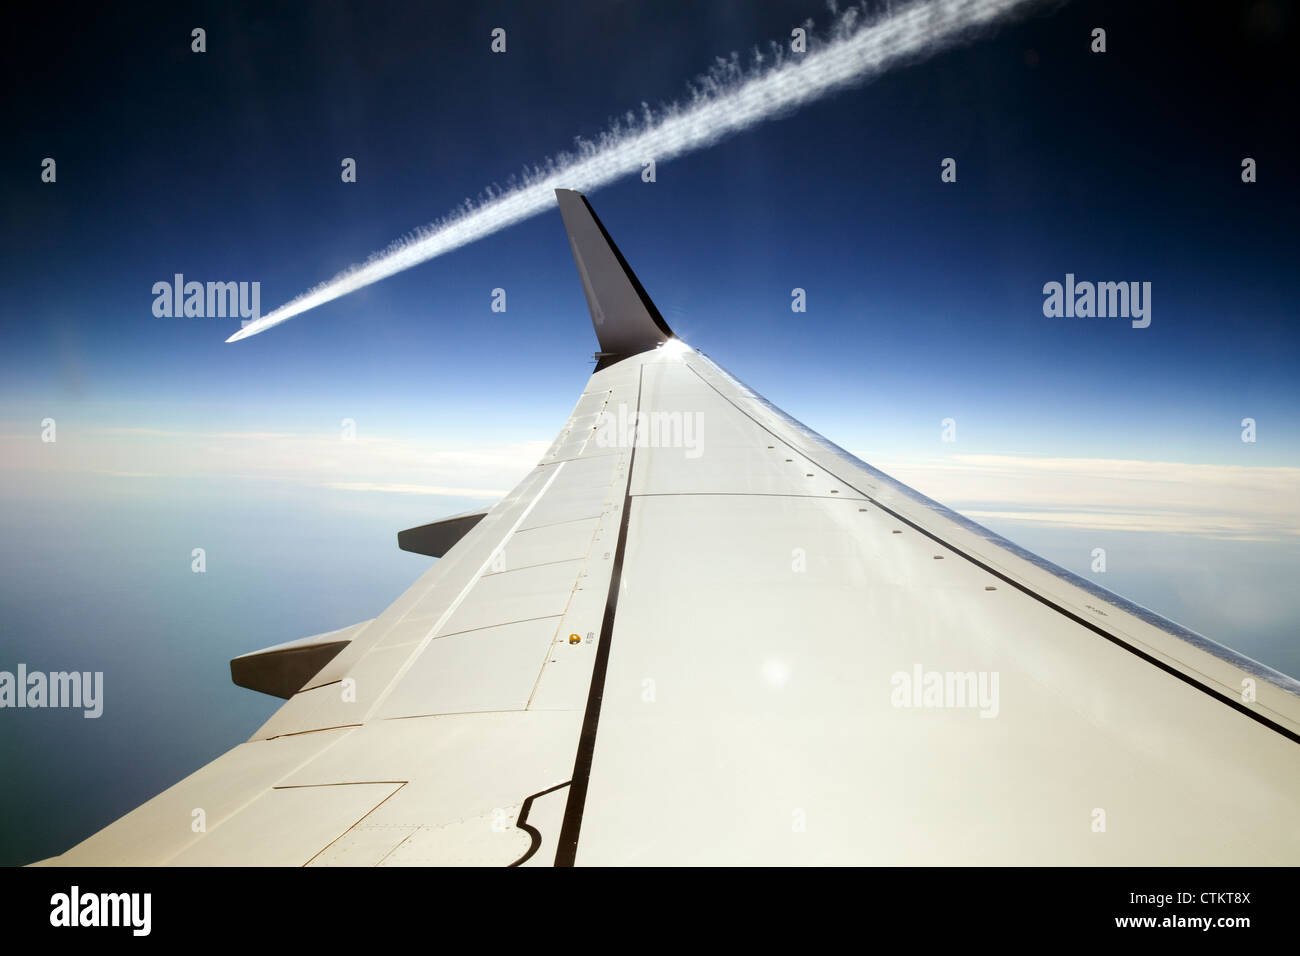 Dramatic airplane vapour trail passing a plane wing seen from inside the aeroplane Stock Photo